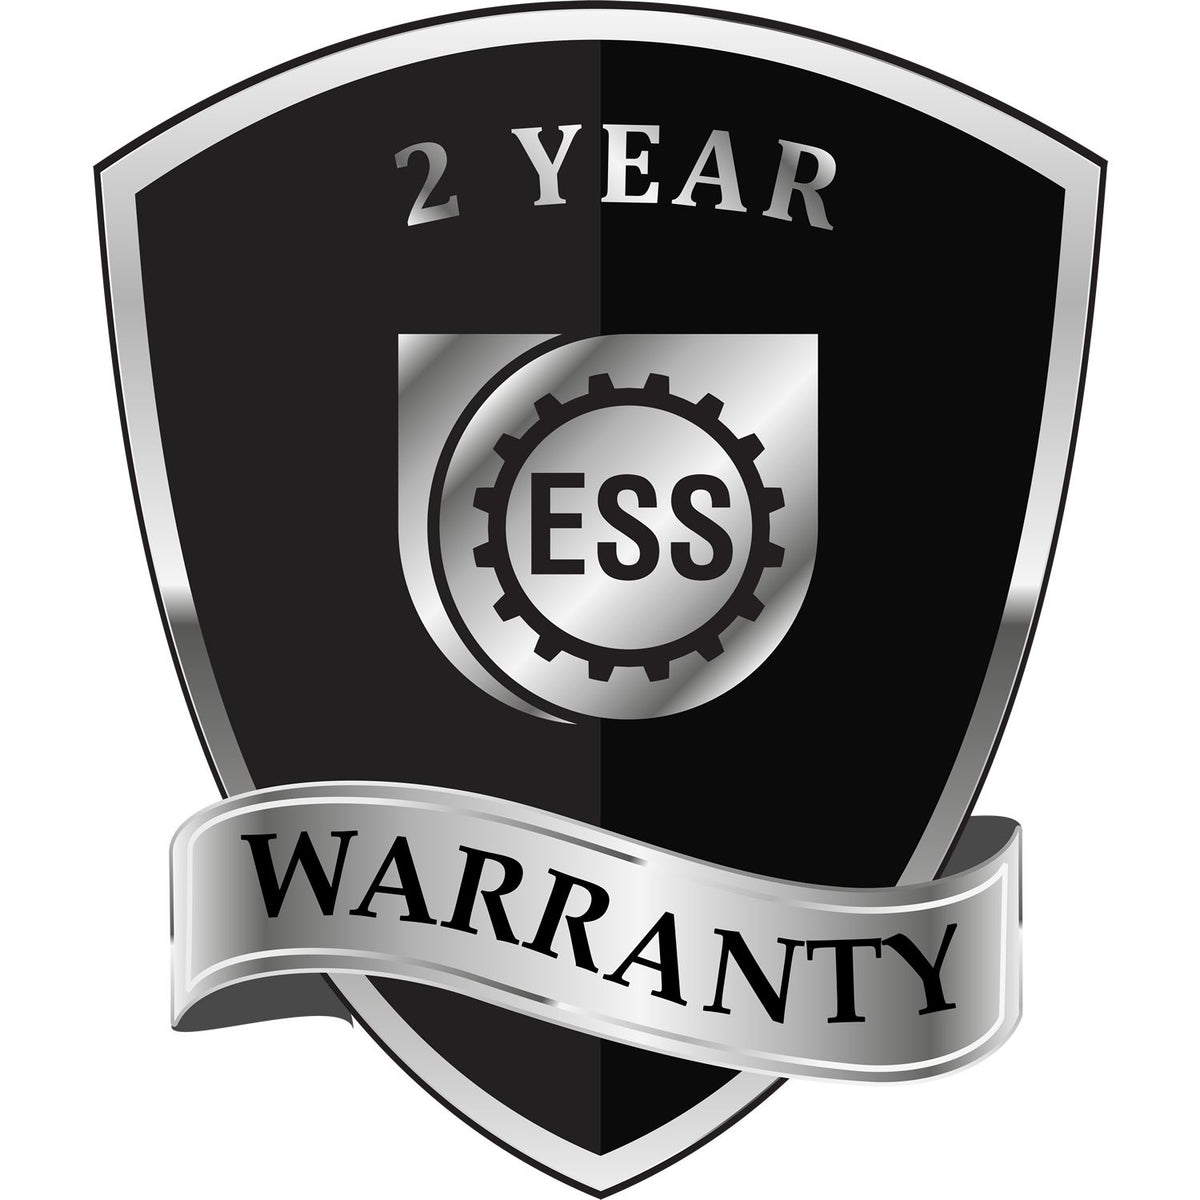 A badge or emblem showing a warranty icon for the Handheld Louisiana Land Surveyor Seal